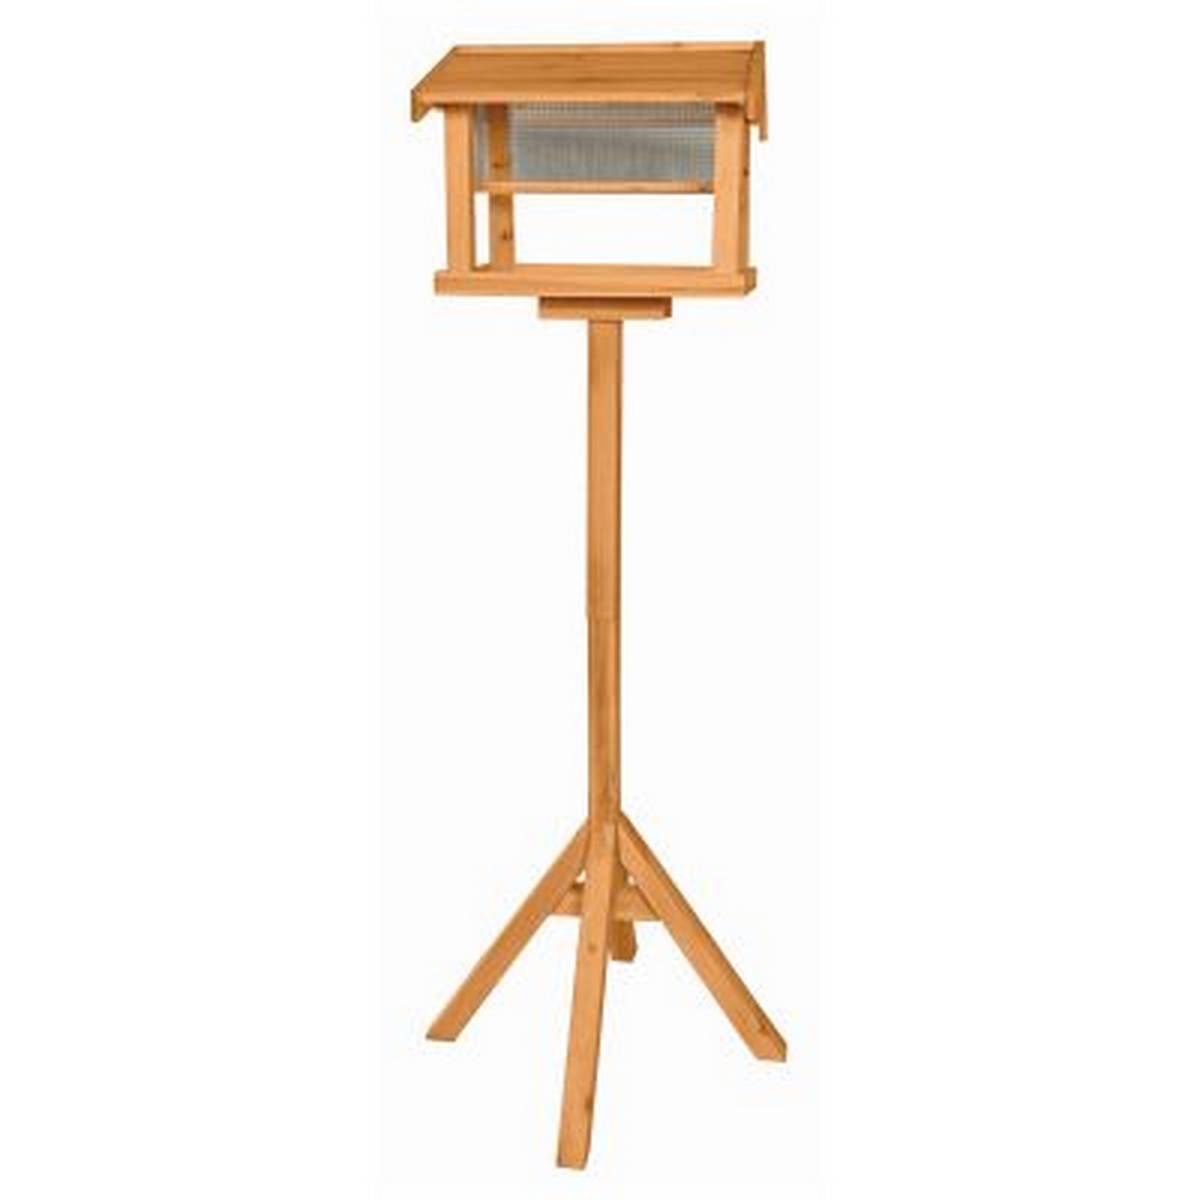 REDWOOD BIRD TABLE WITH BUILT IN FEEDER BB-BH305